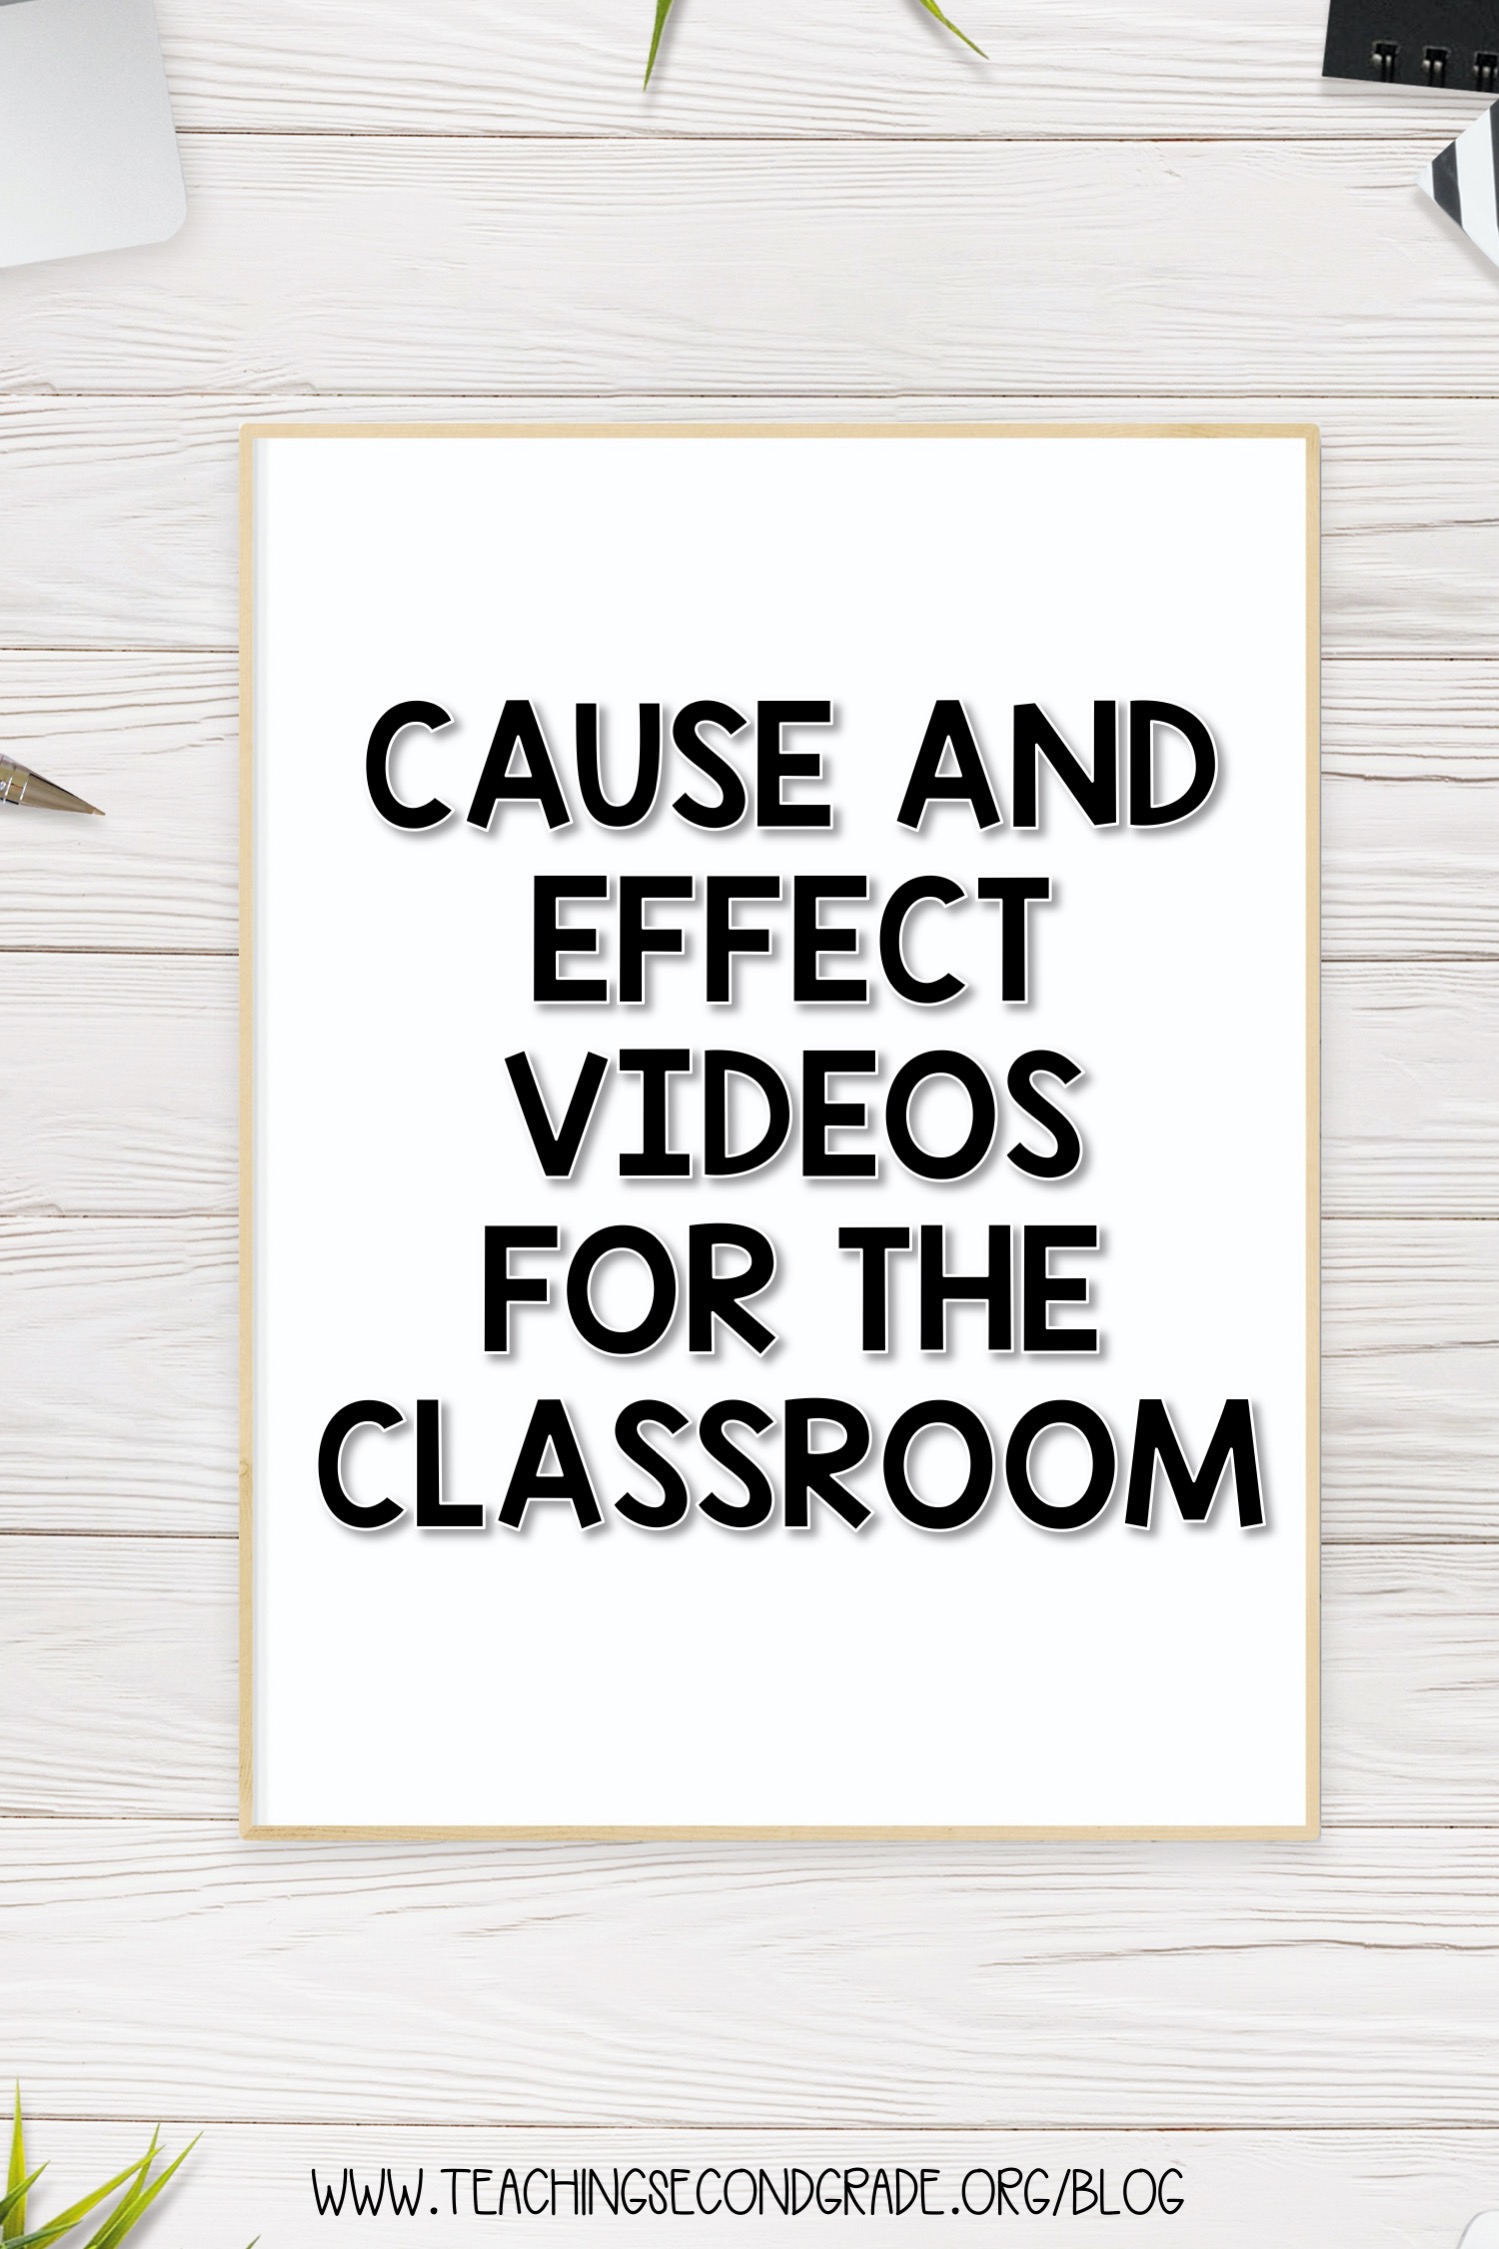 Are you spending time going back and reviewing concepts that students don't fully understand? Cause and effect is a great one to constantly review! #teachingsecondgrade #causeandeffect #videolessons #reading #curriculum | Curriculum for Teachers | Reading Lessons | Teaching Cause and Effect |